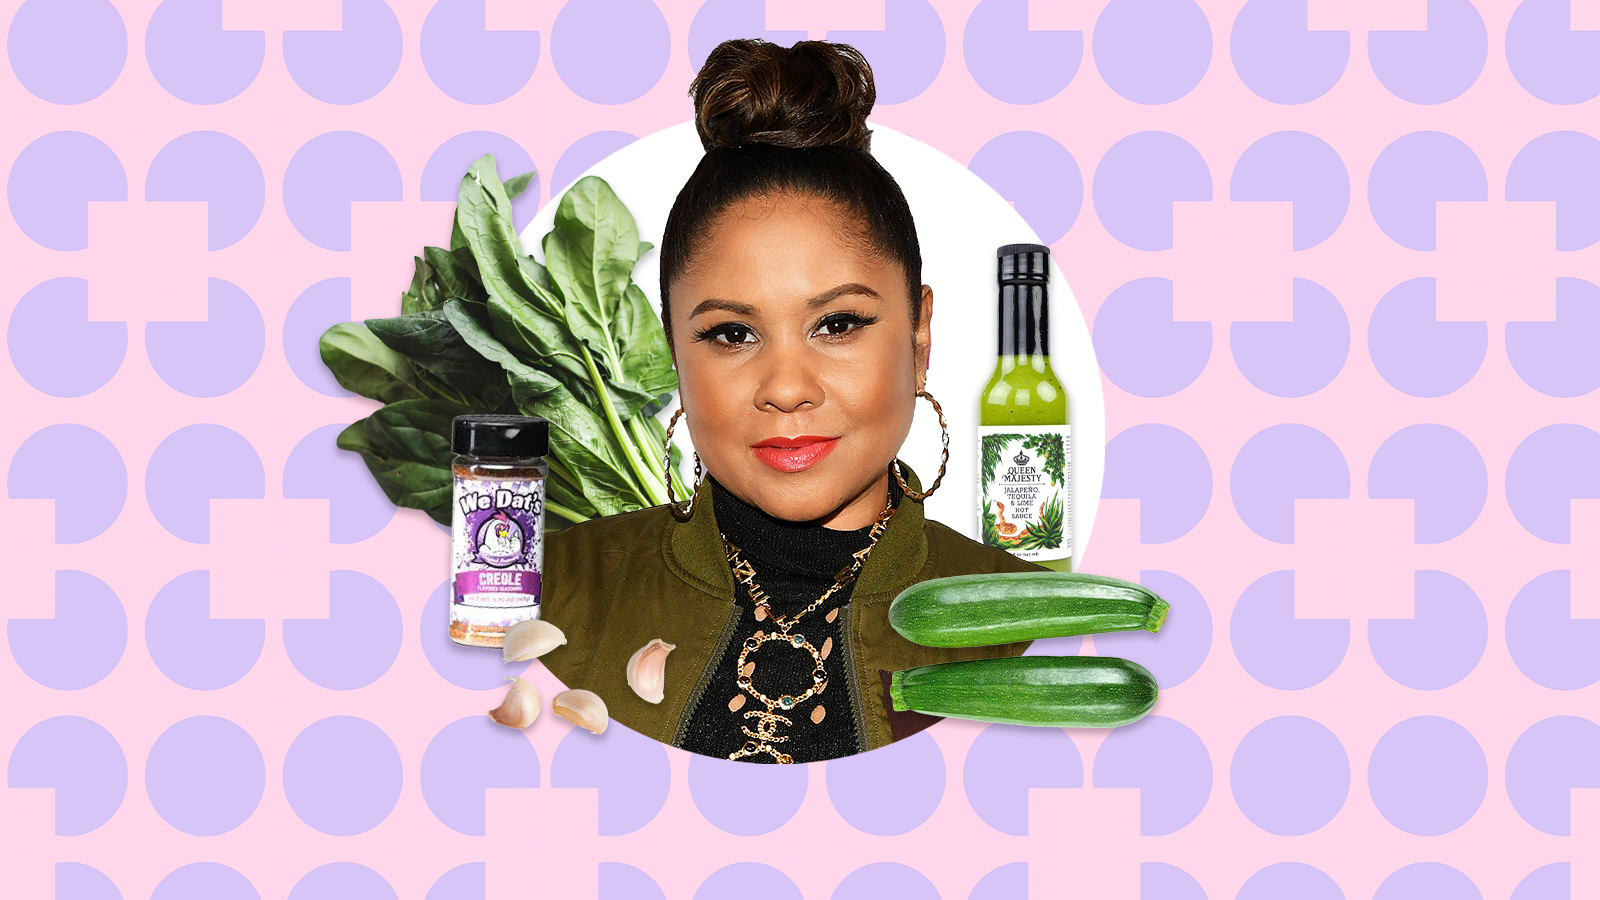 Angela Yee’s Oven-Roasted Veggie Wrap Recipe Is Rapid, Easy, and Stout of Flavor